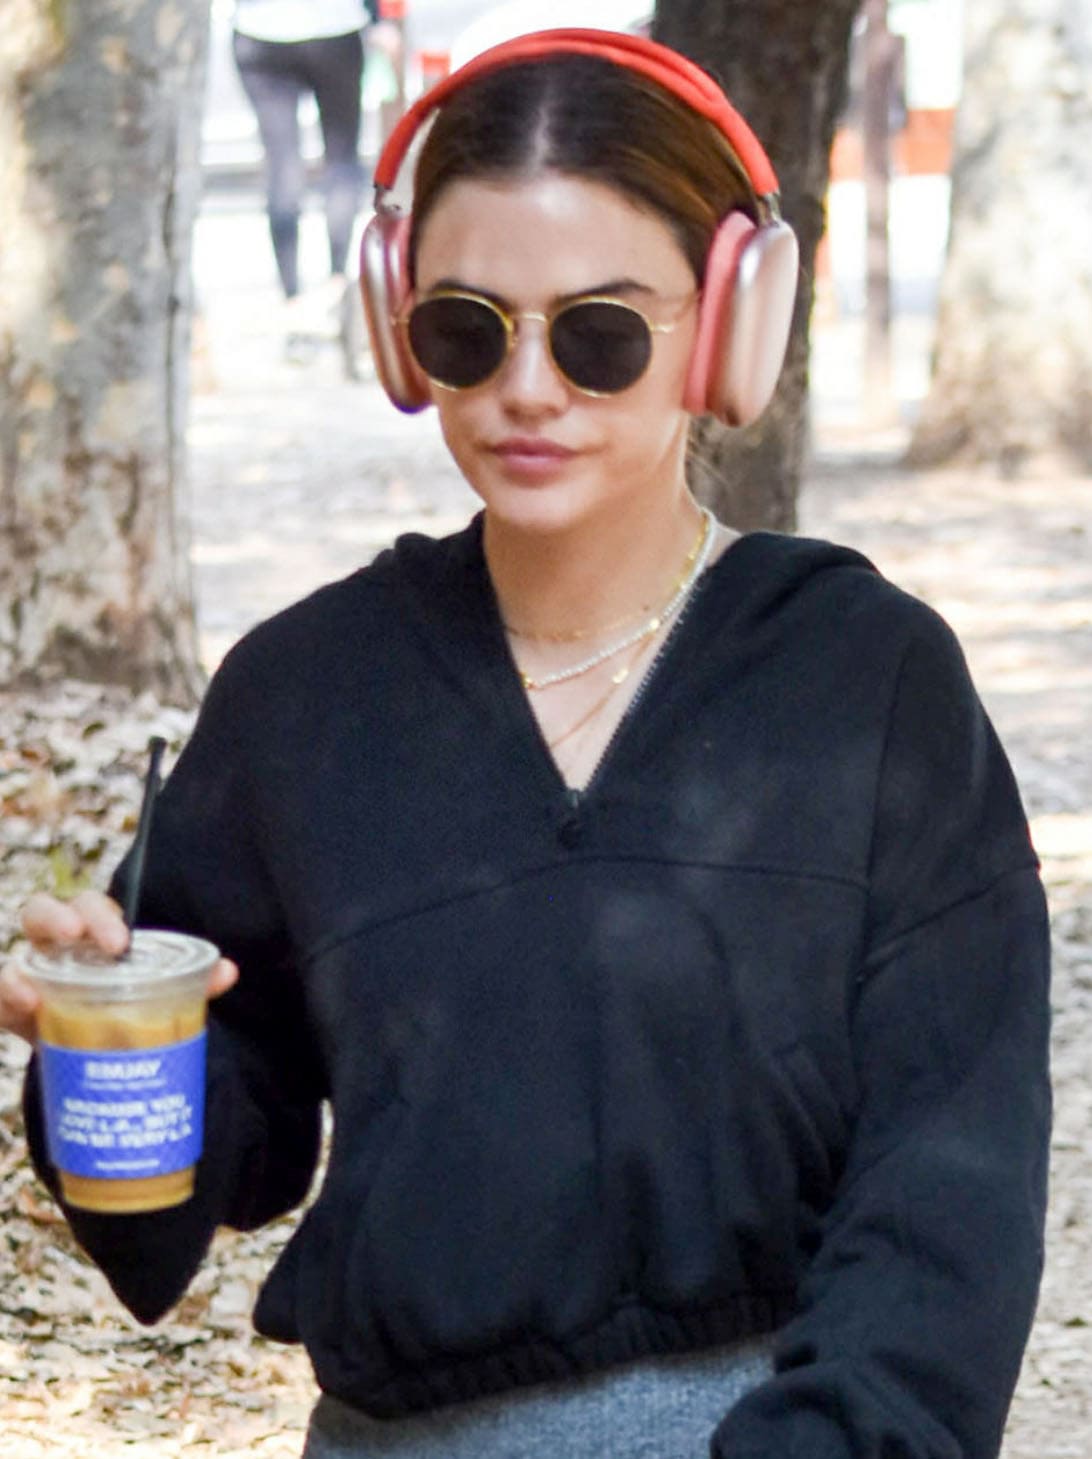 Lucy Hale goes hiking with headphones on